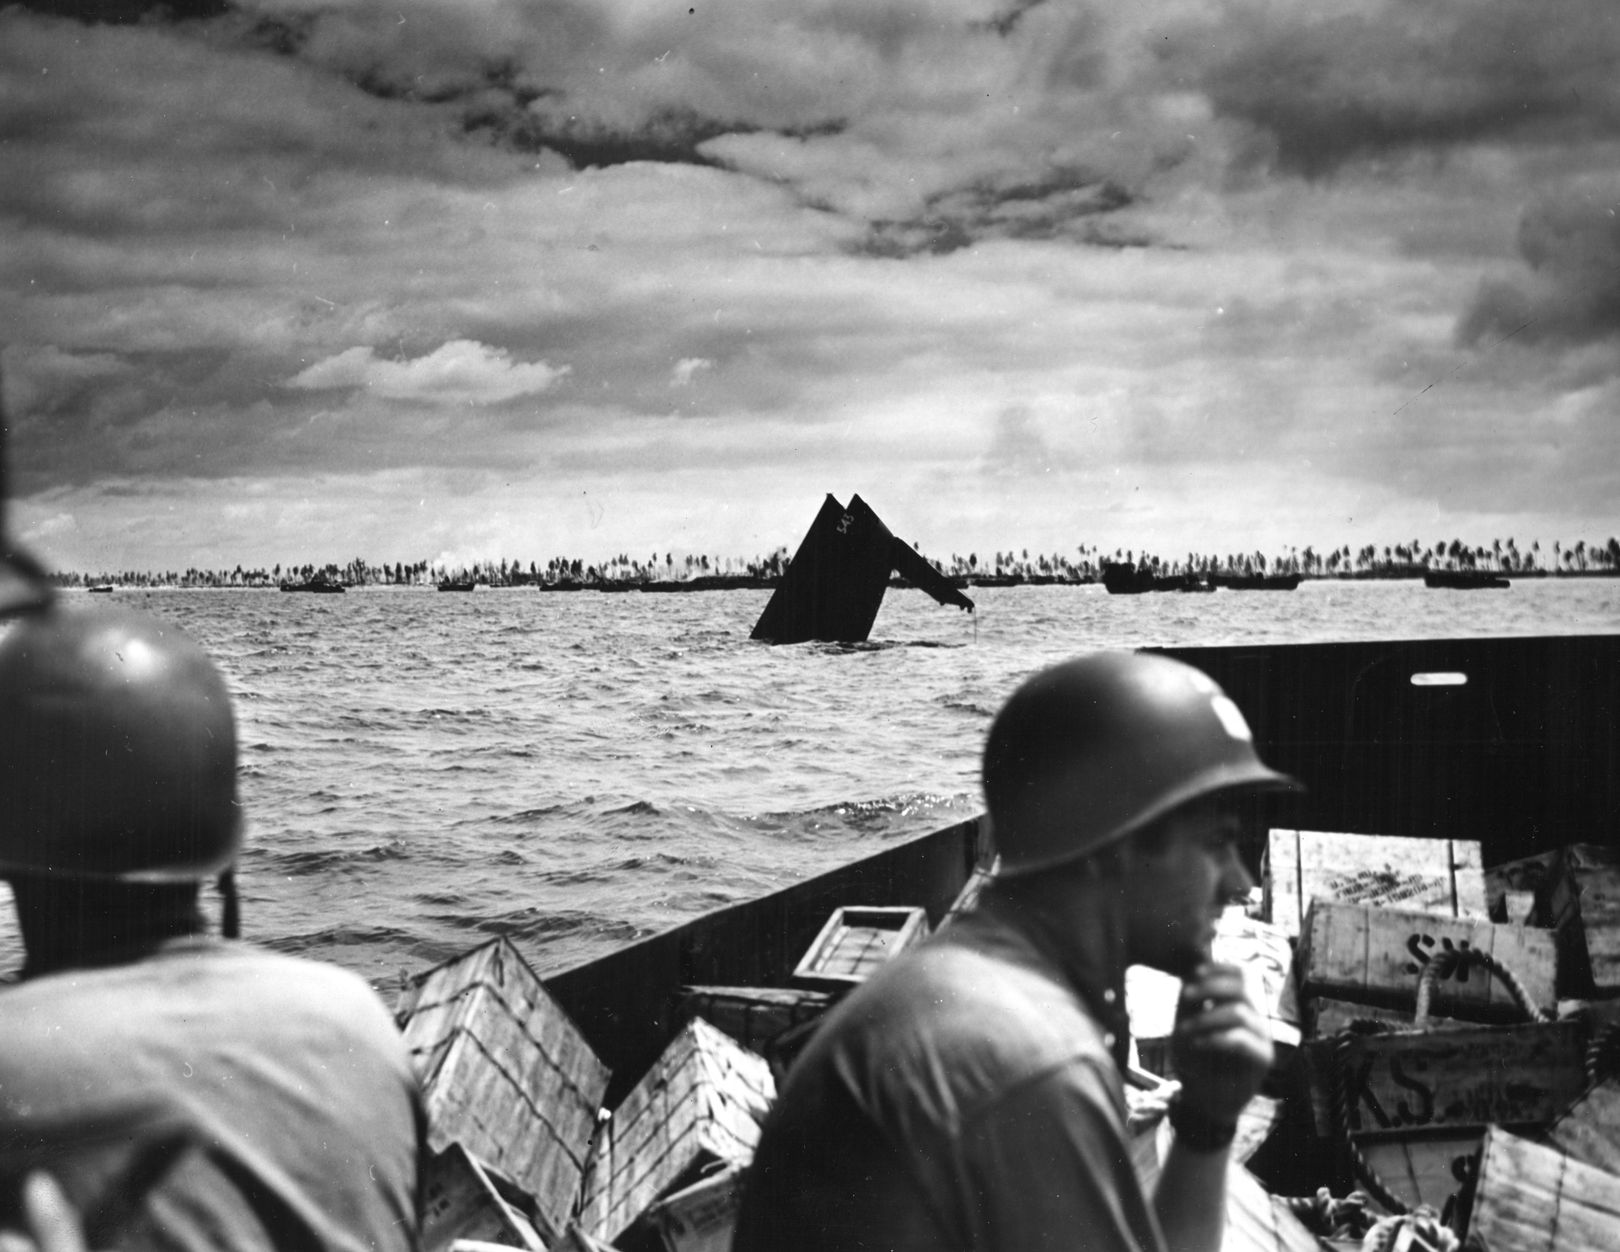 U.S. Coast Guardsmen ferry supplies to Betio past an LCM-3 that has taken a direct hit and sunk stern first—mute testimony to the ferocity of Japanese resistance at the water’s edge.